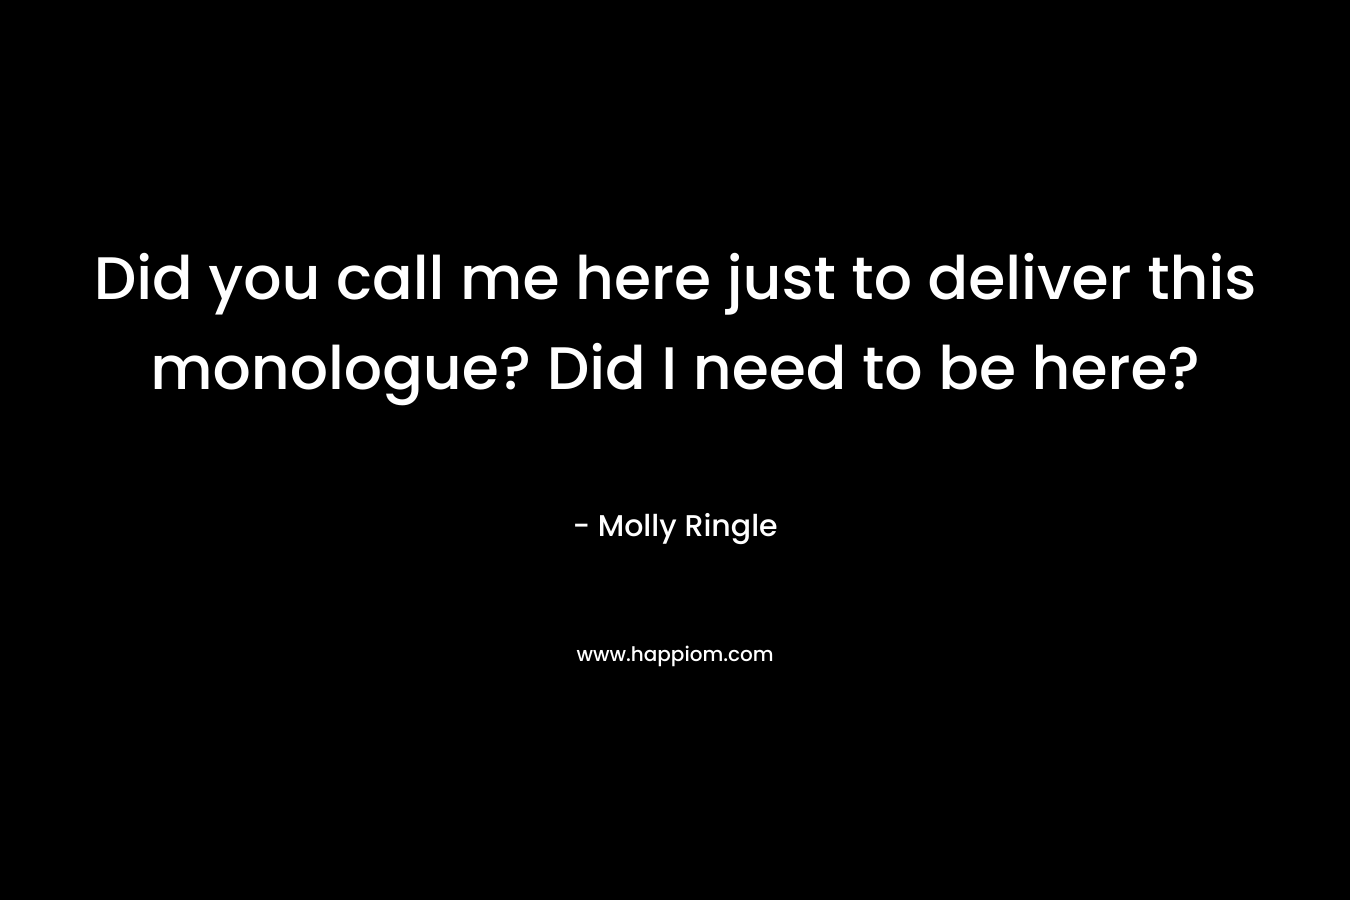 Did you call me here just to deliver this monologue? Did I need to be here? – Molly Ringle